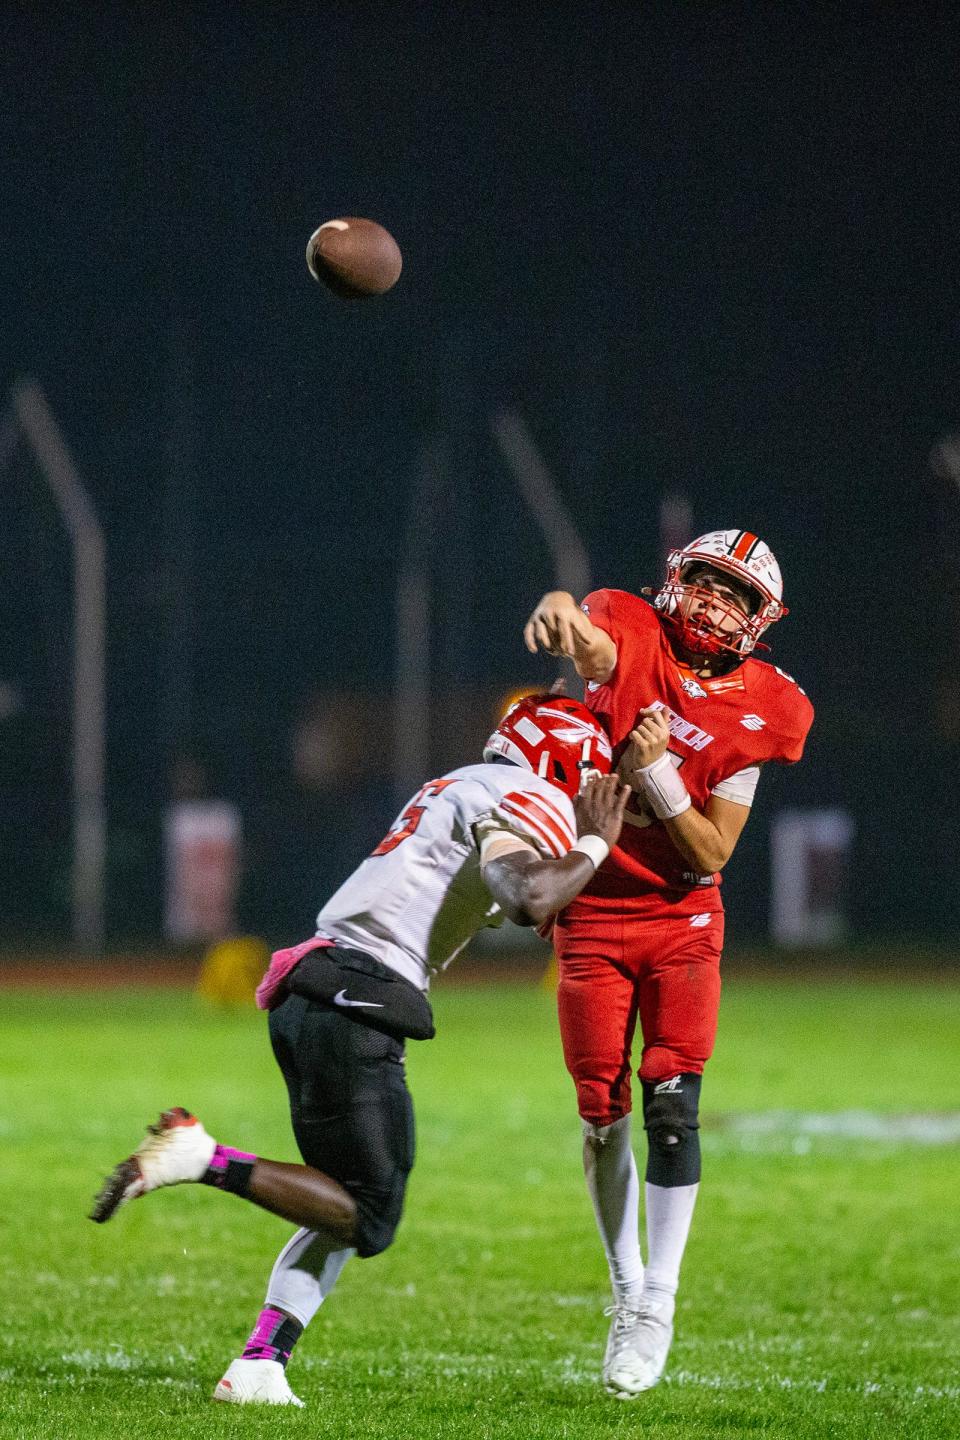 Point Pleasant Beach's quarterback Thomas Wagner is challenged by Keyport's Mekai Henderson as he passes the ball during the first half of the Keyport High School vs. Point Pleasant Beach High School football game at Donald T. Fioretti Field in Point Pleasant Beach, NJ Friday, October 6, 2023.